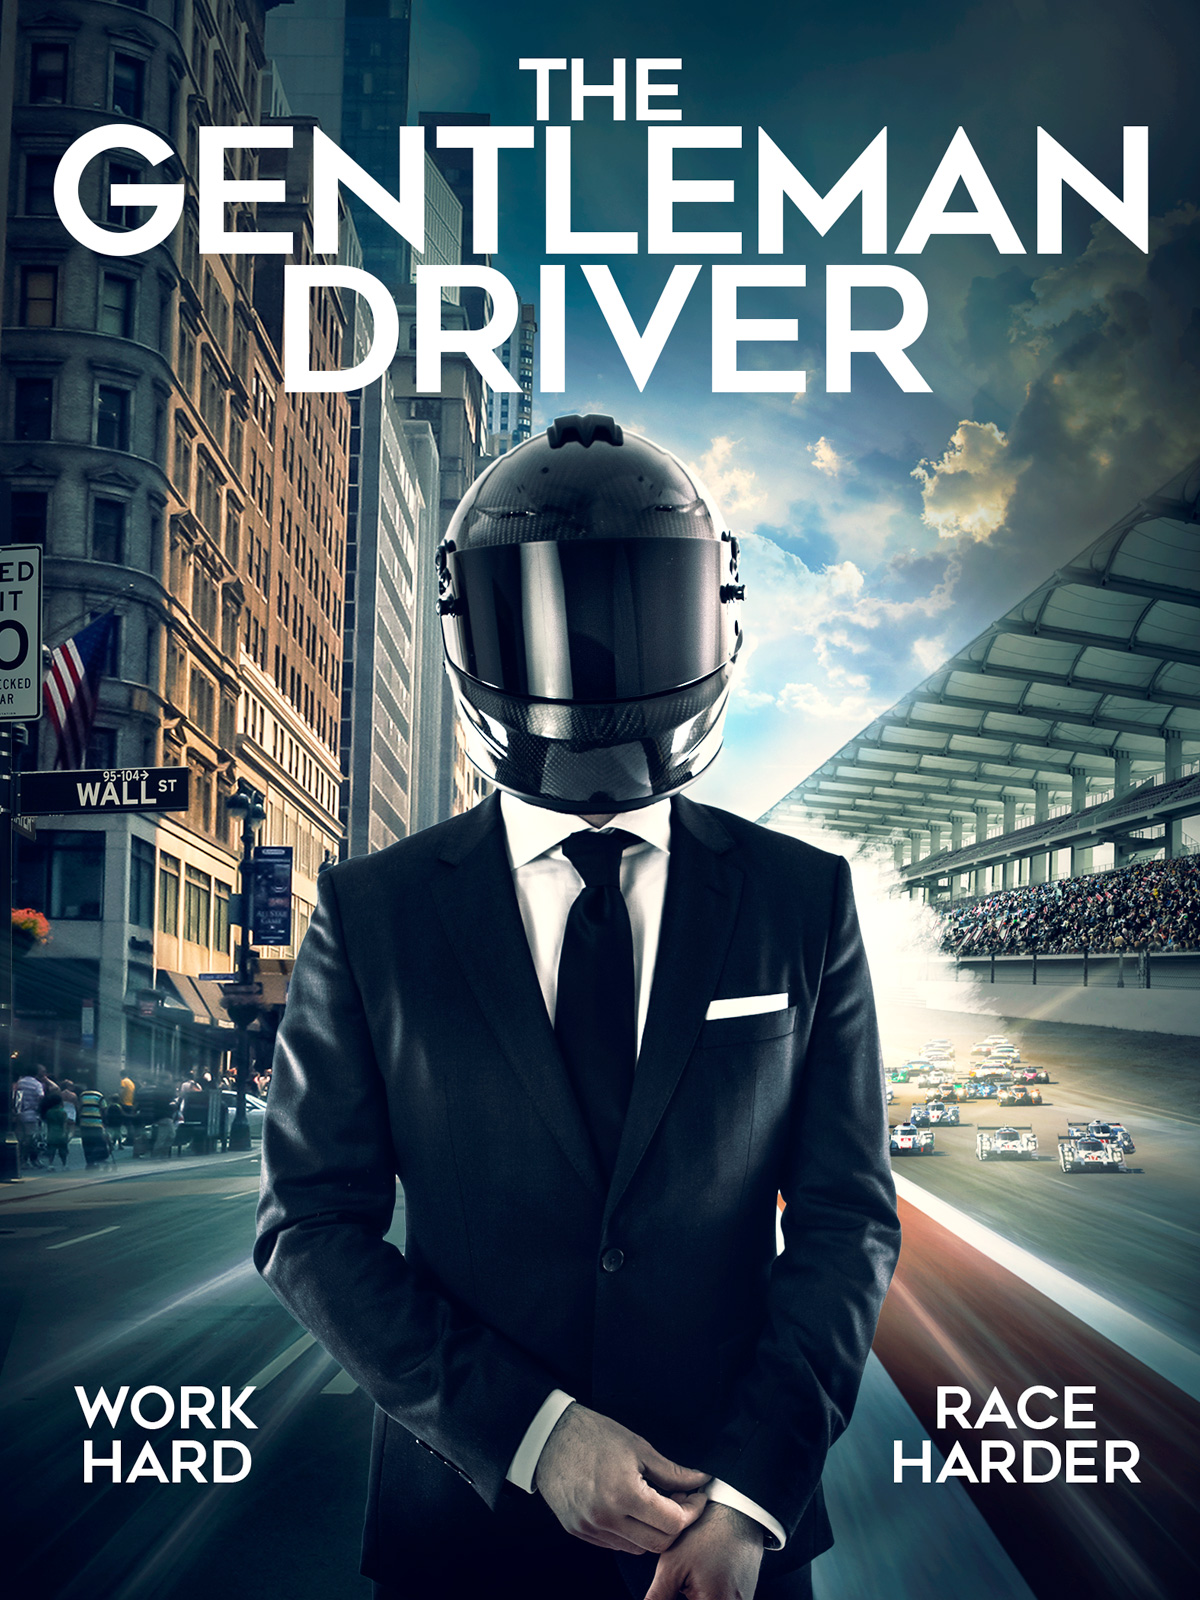 Here's A Look At New Racing Documentary 'The Gentleman Driver'